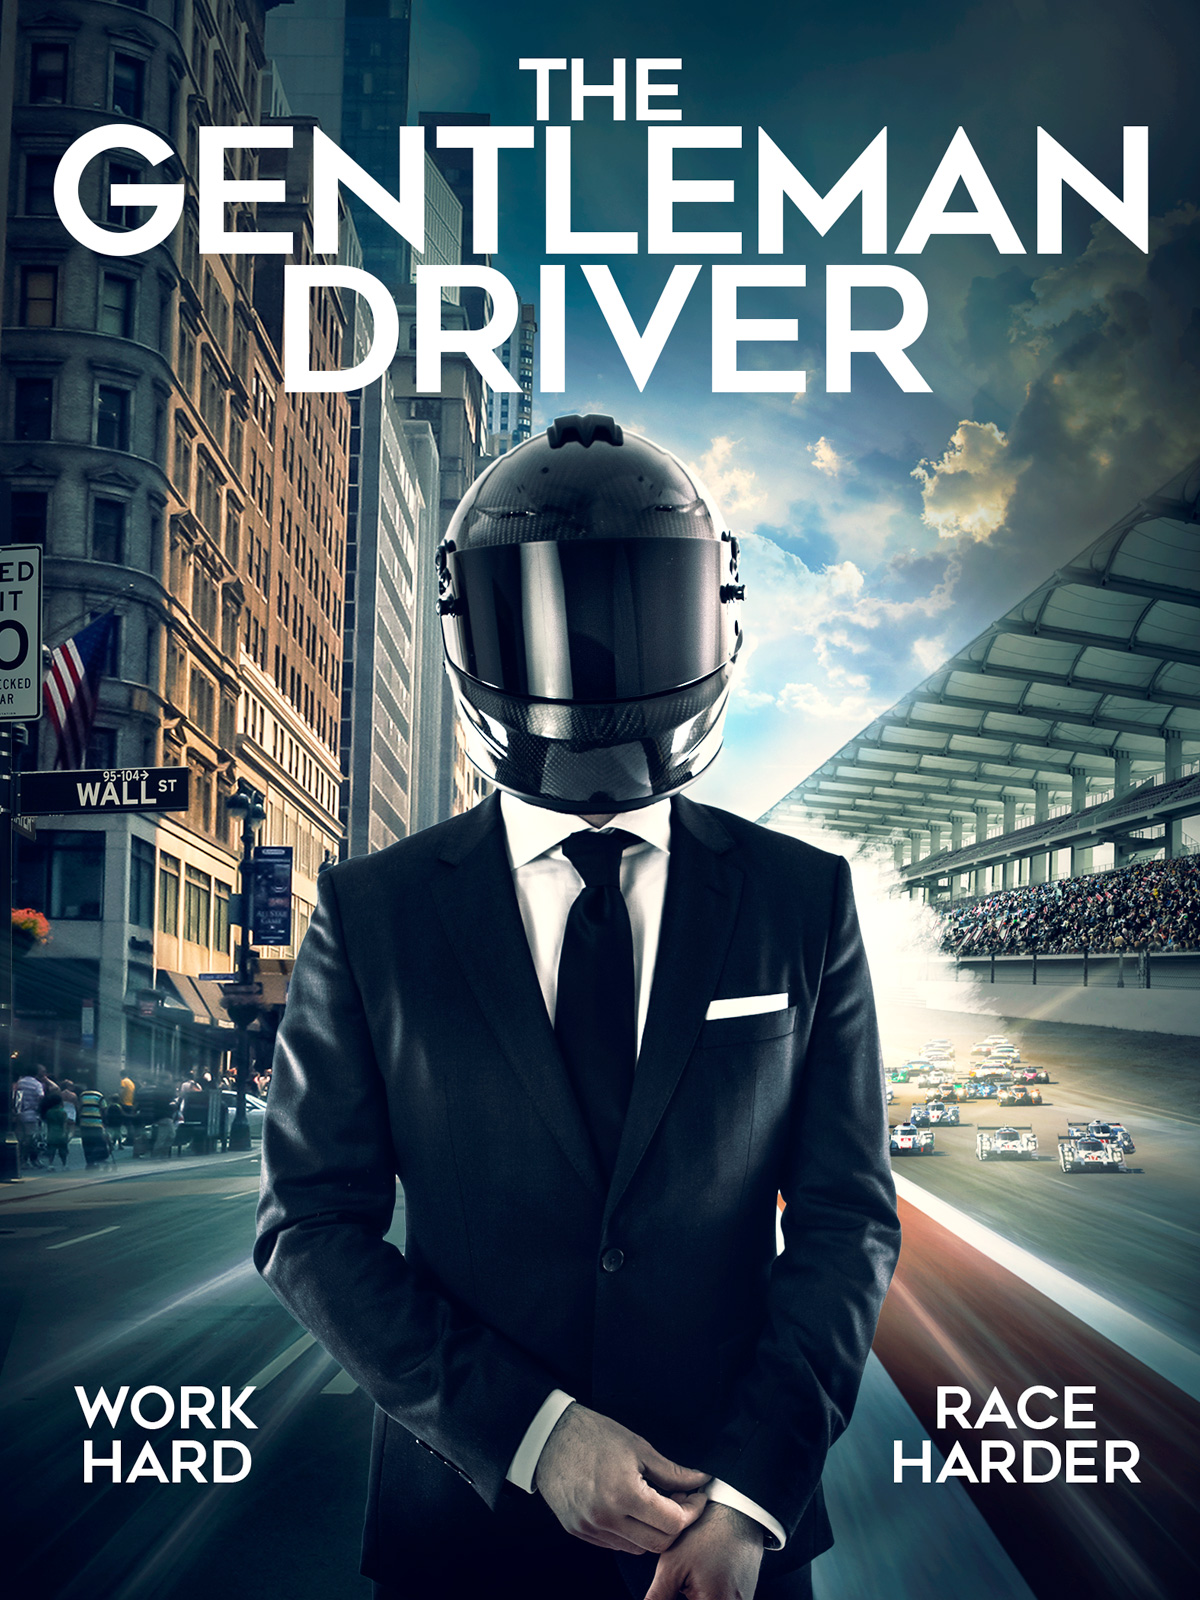 Here's A Look At New Racing Documentary 'The Gentleman Driver'